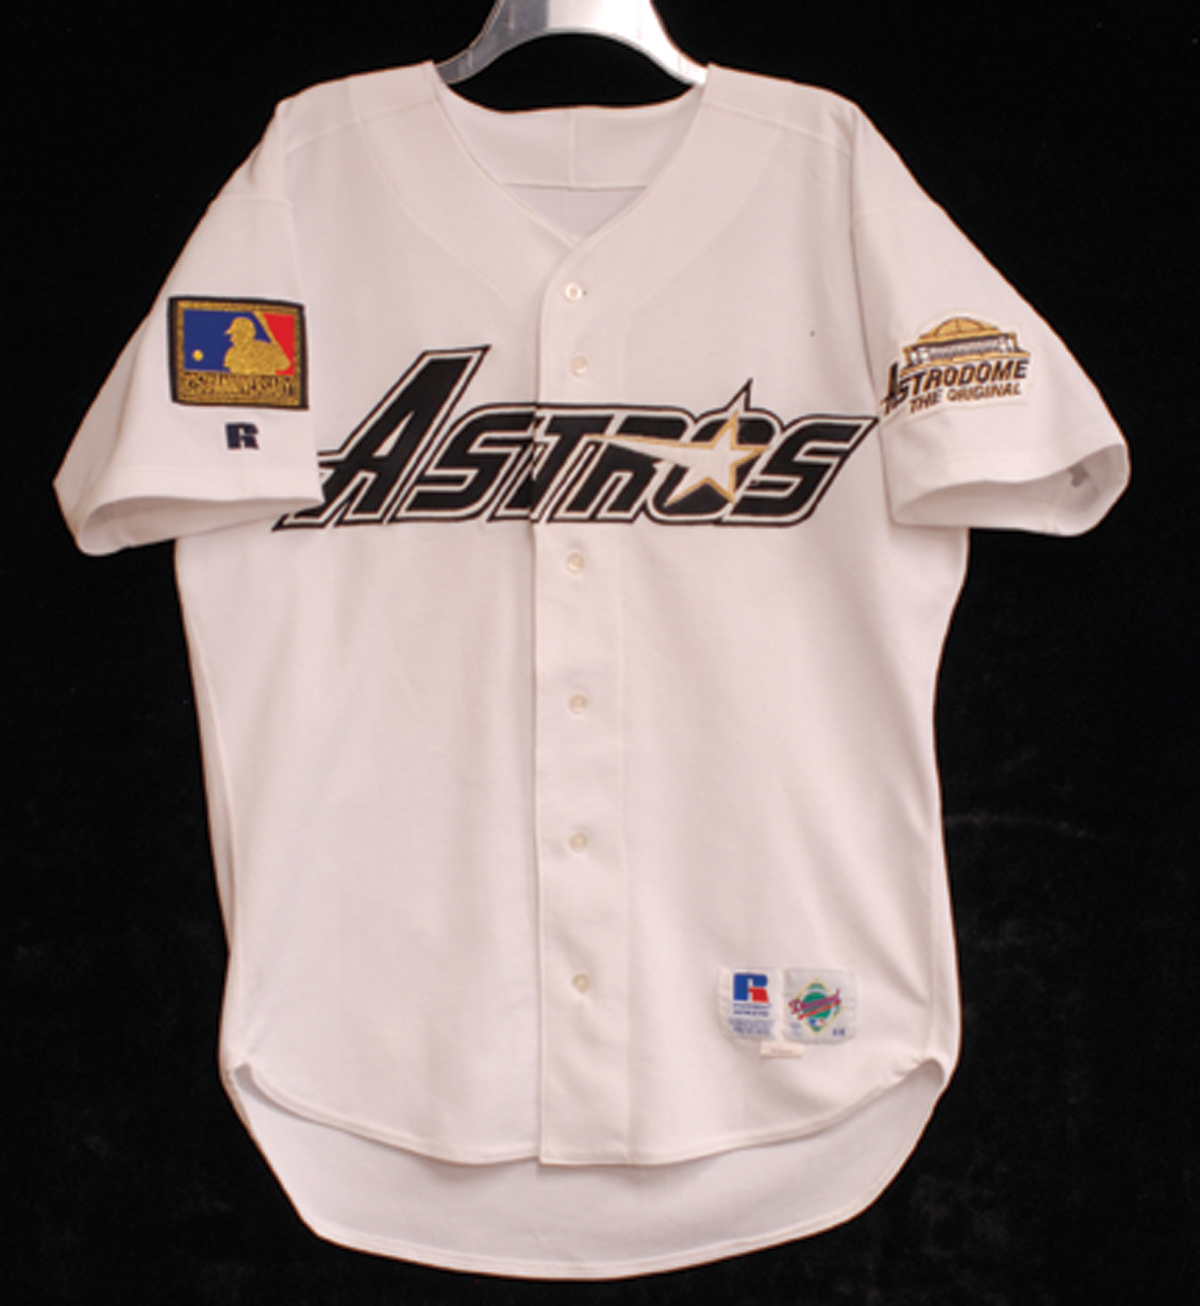 astros blue and gold jersey